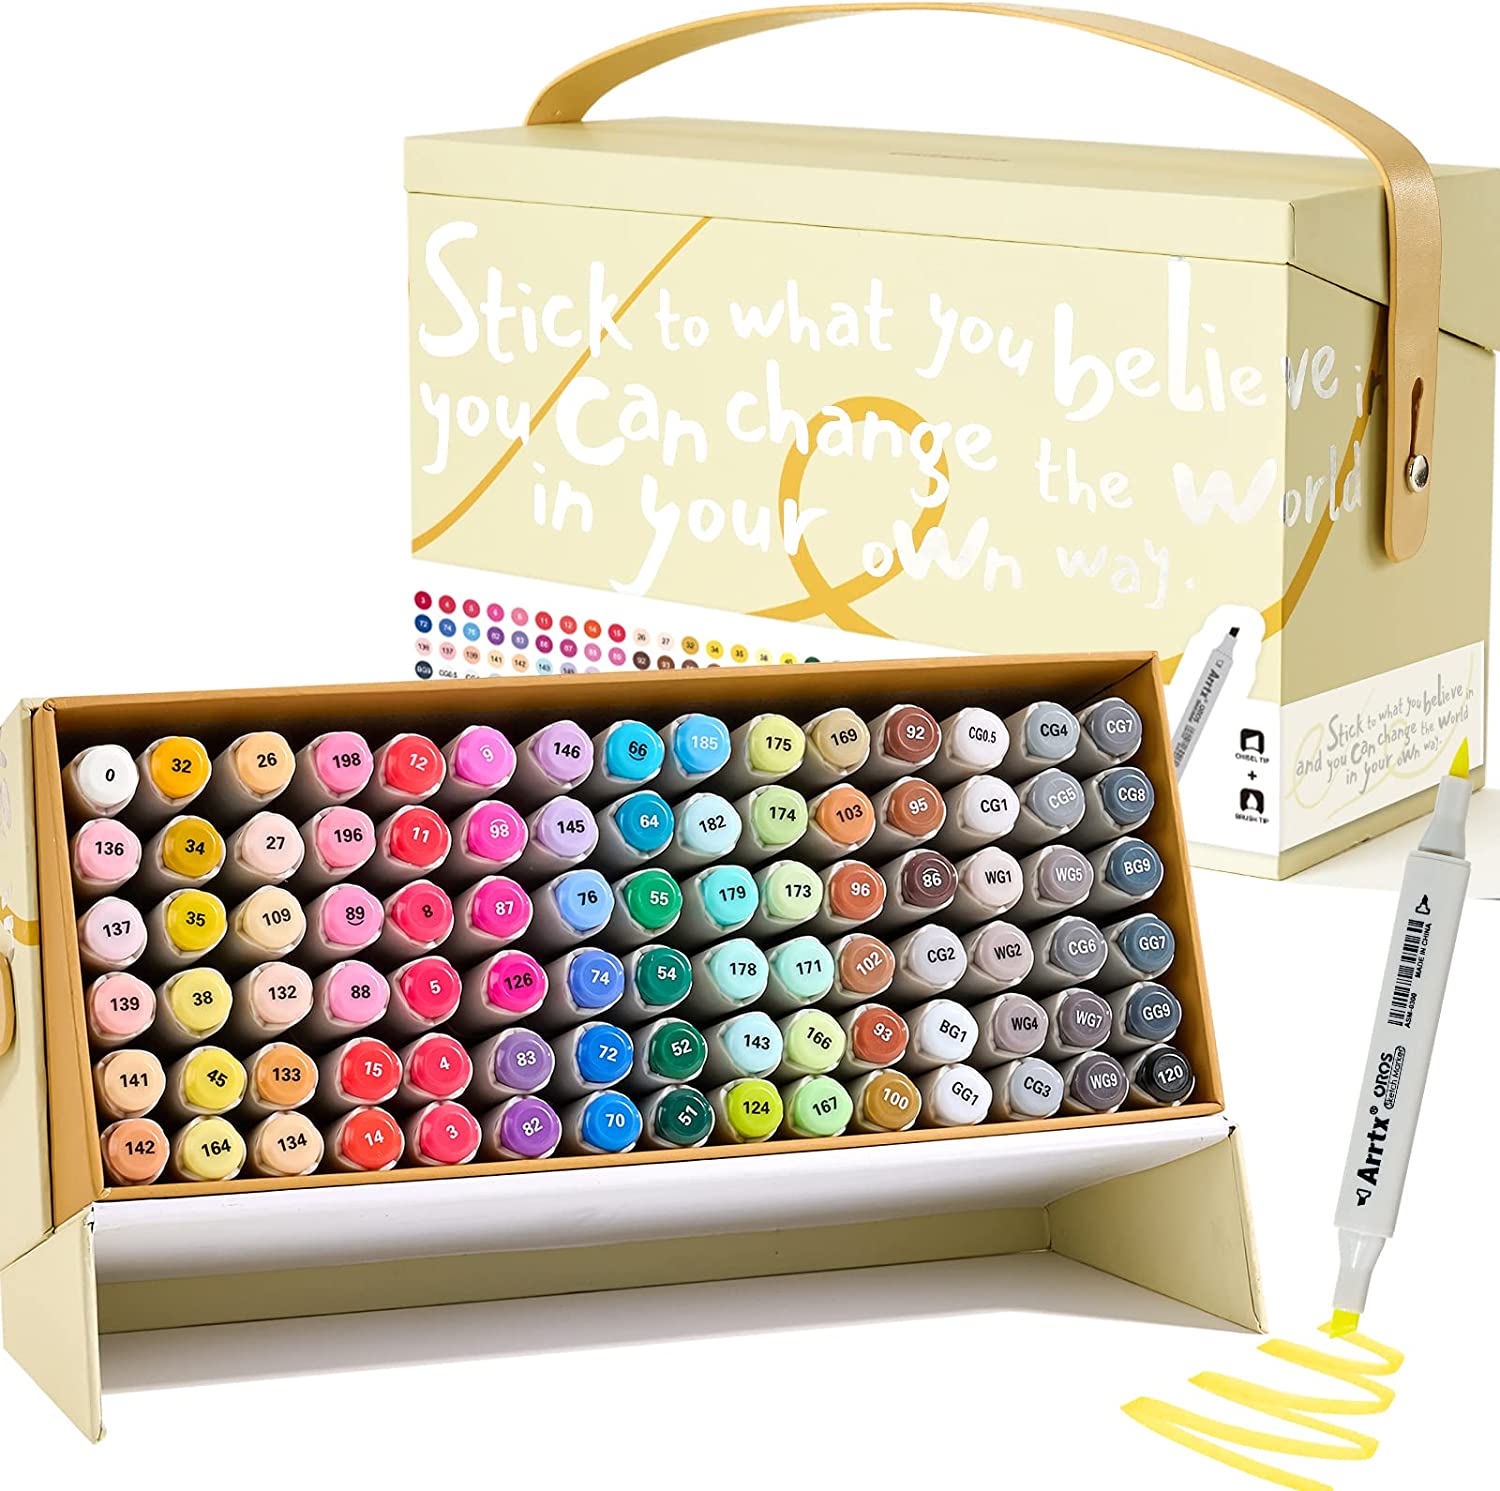 20 Clever Ways to Organize Your Coloring Supplies - Sarah Renae Clark -  Coloring Book Artist and Designer